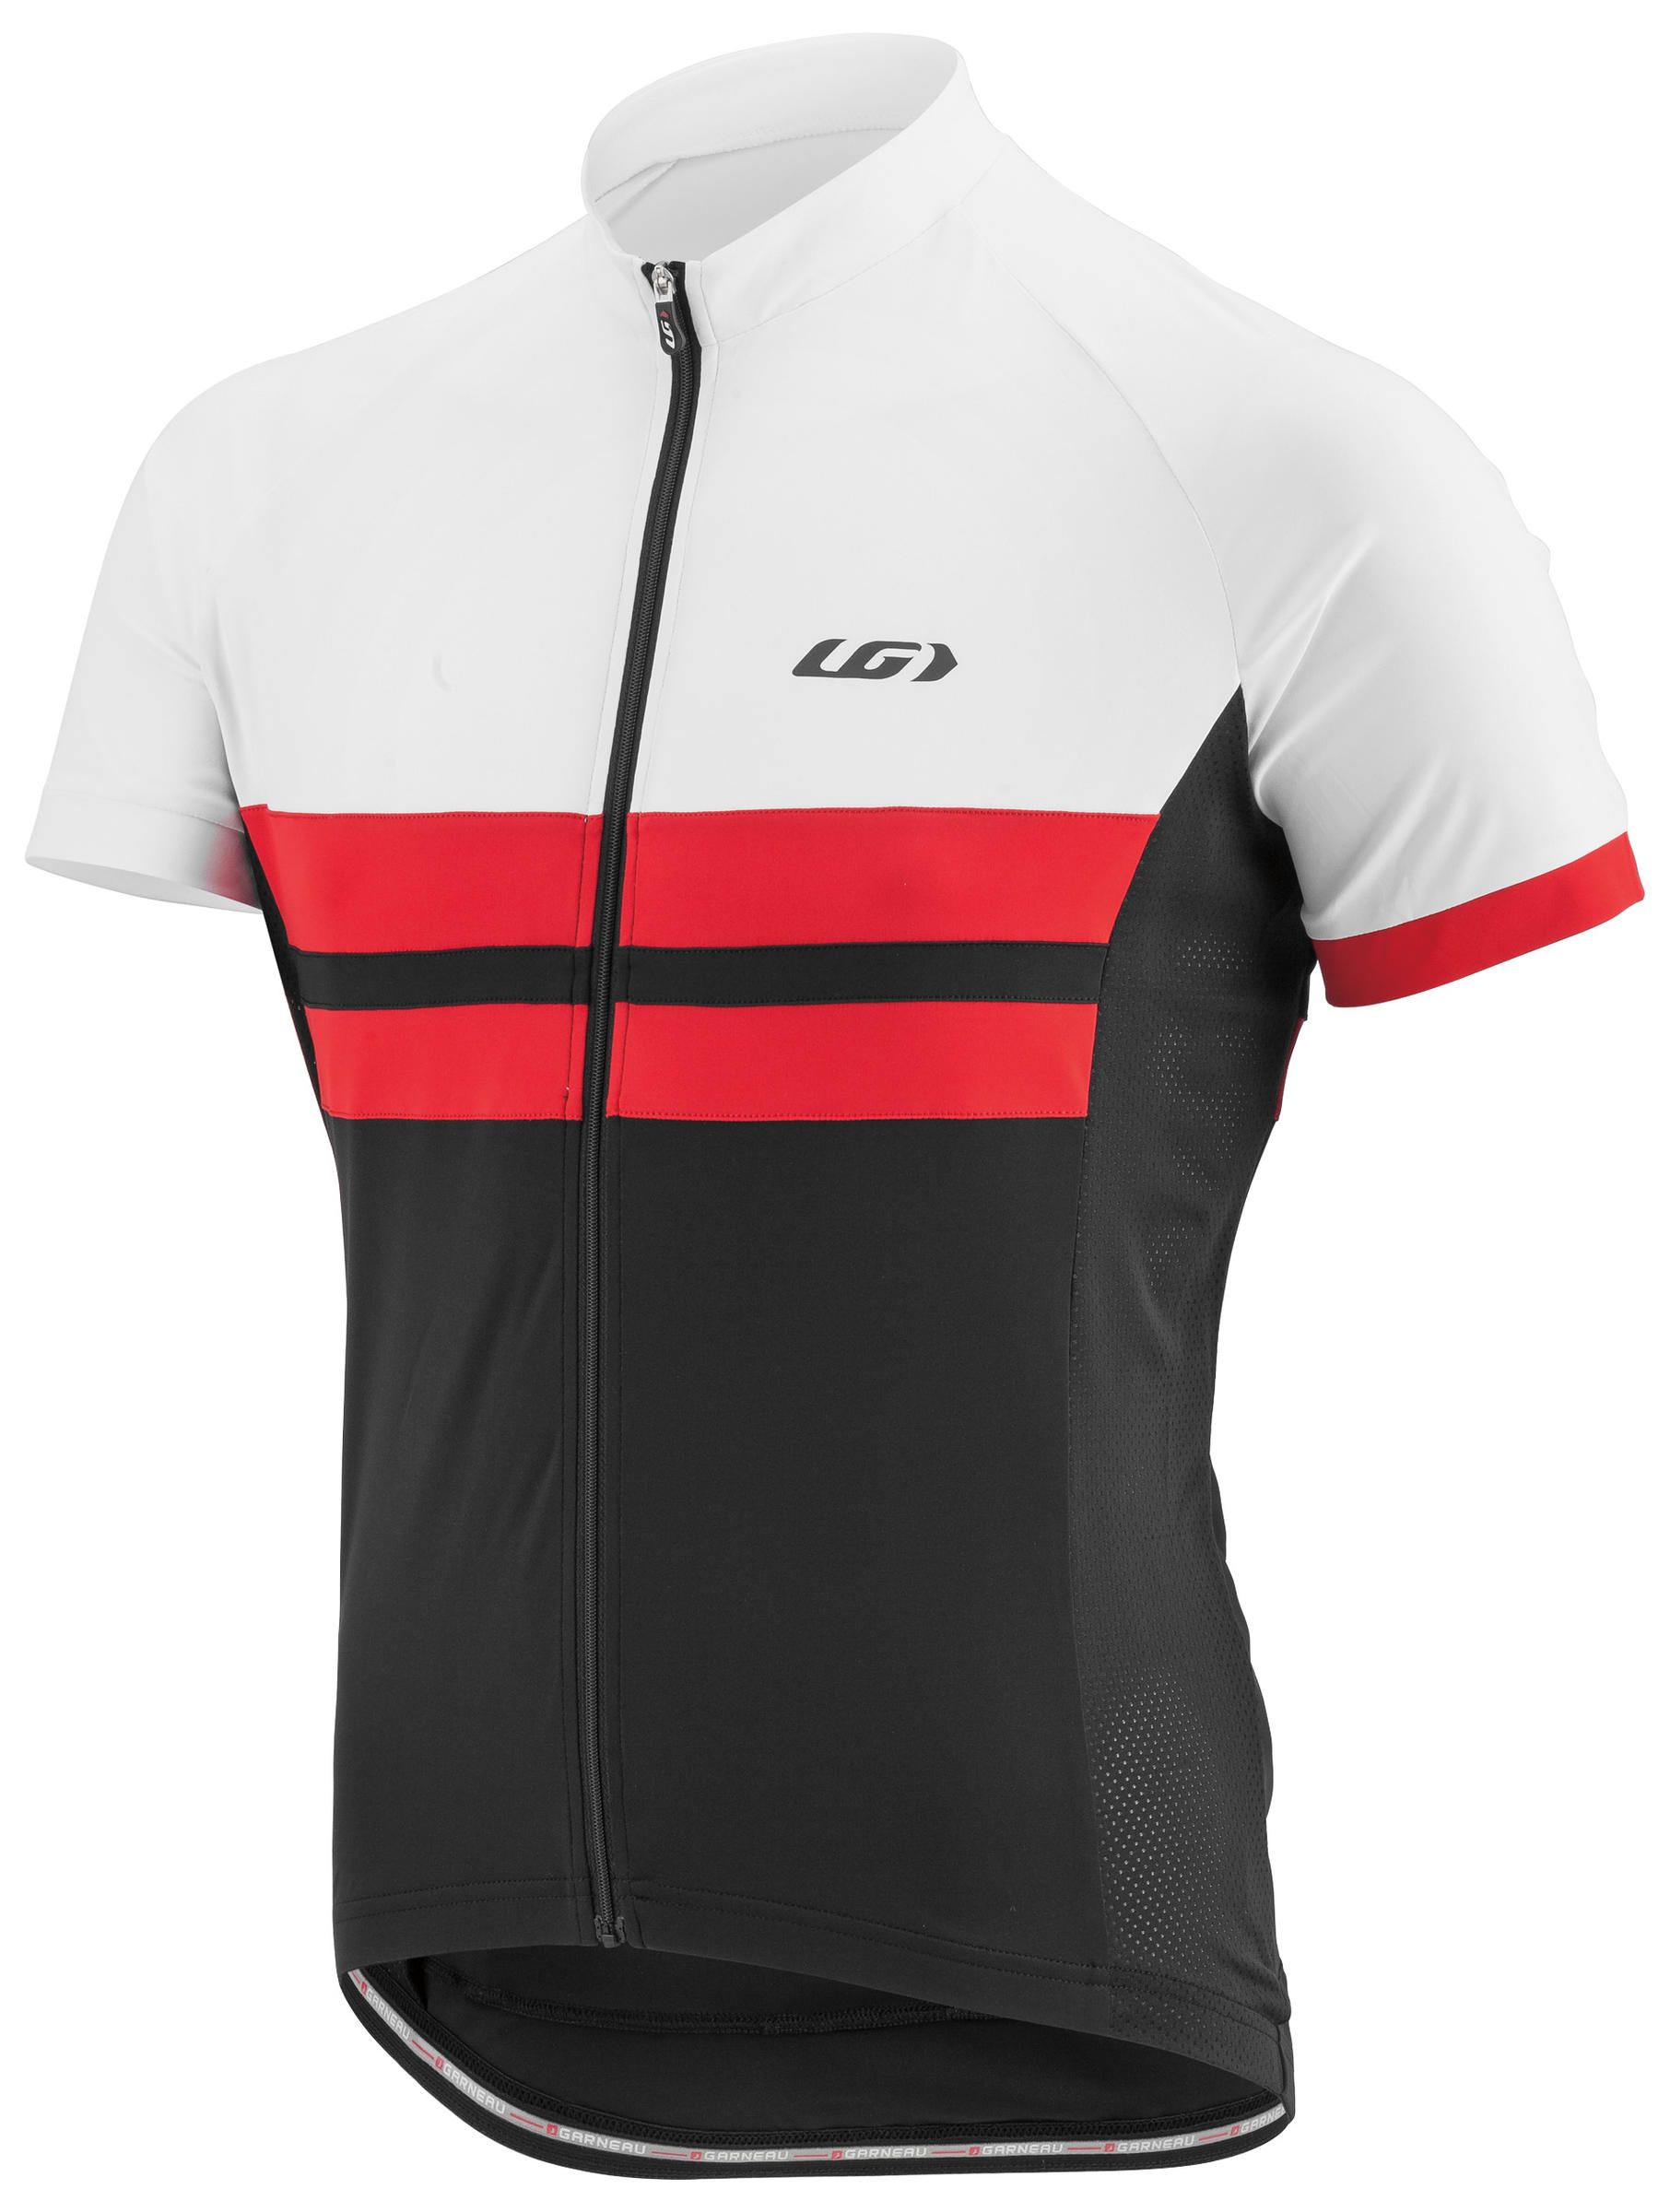 red and white cycling jersey